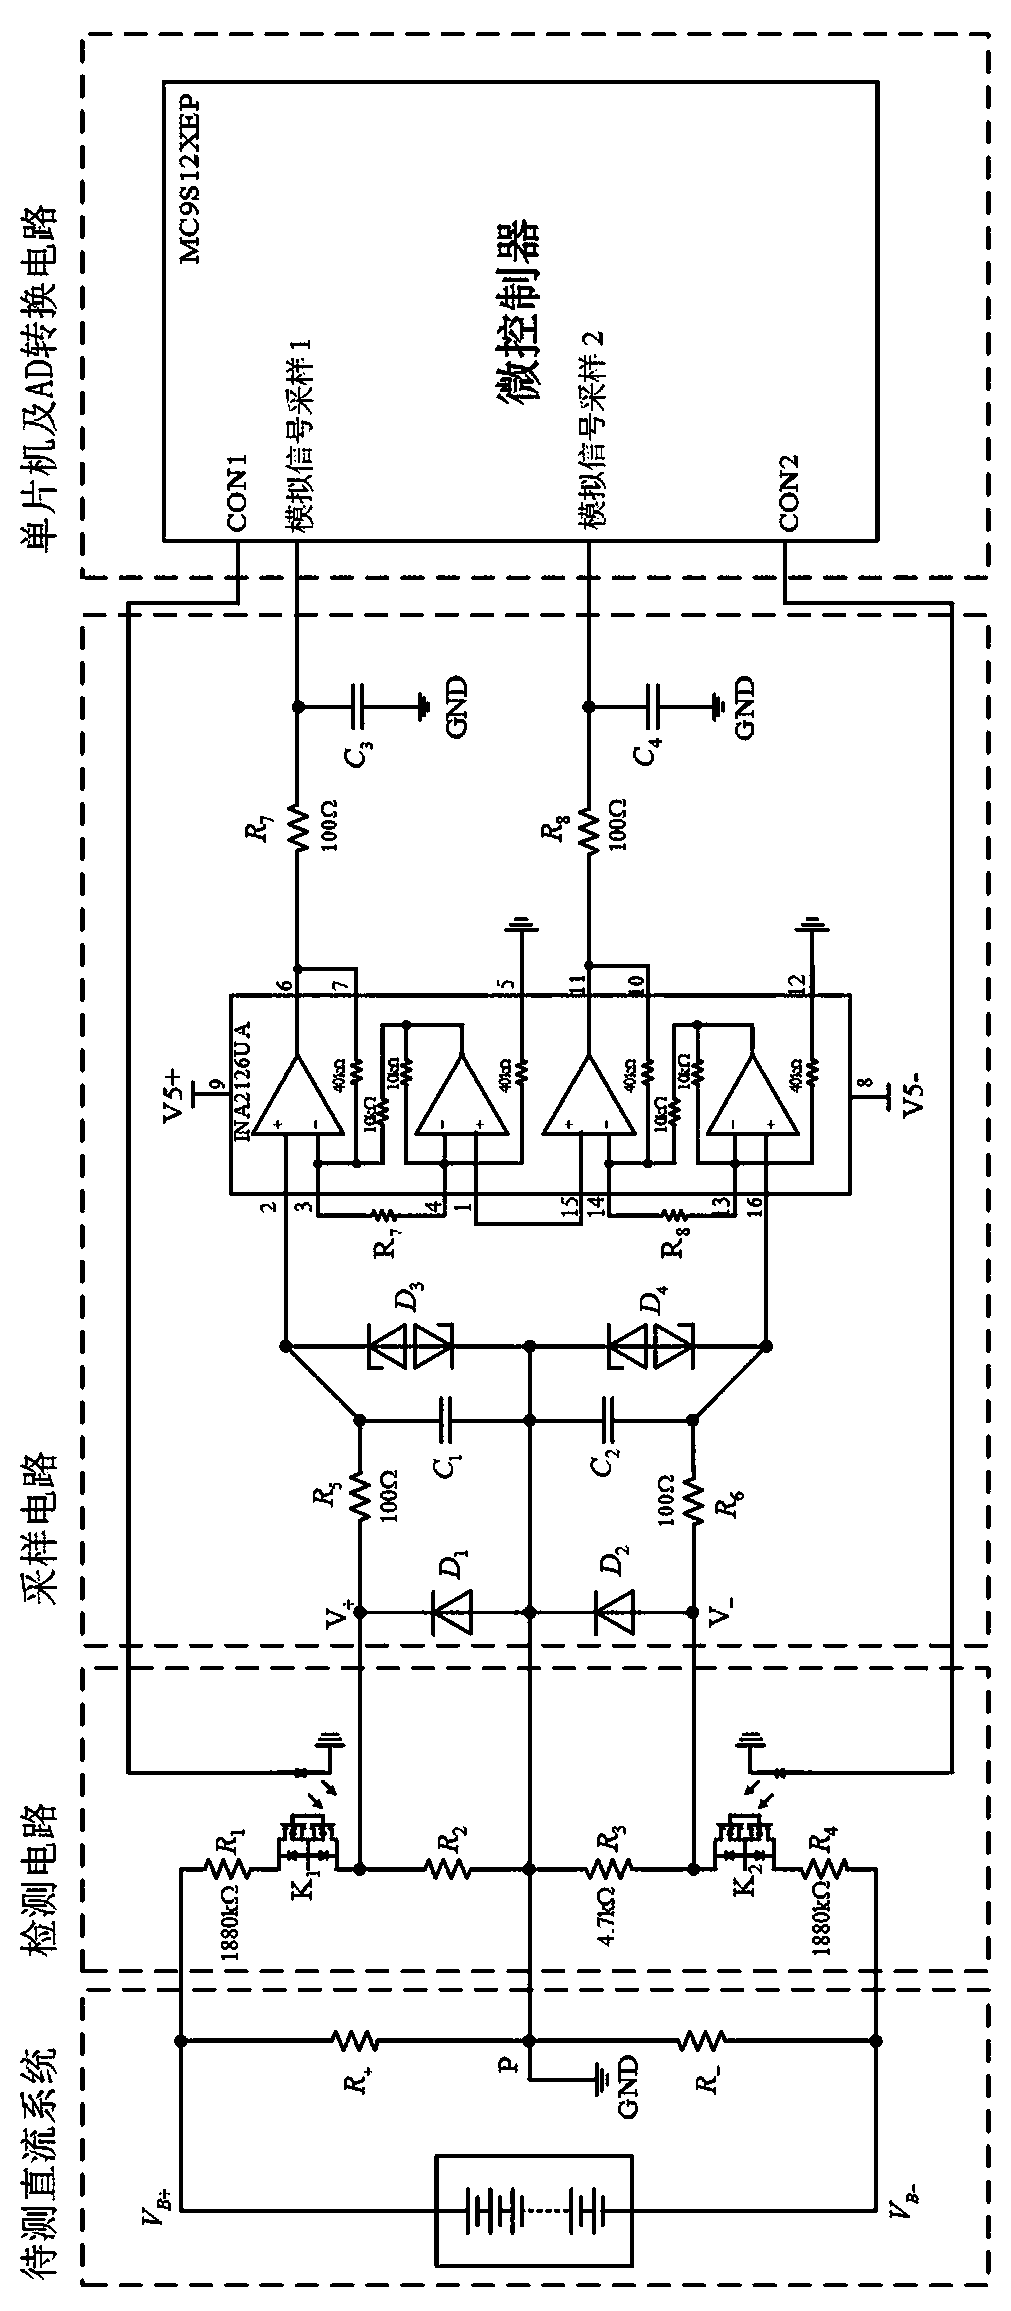 Insulation resistance detecting control circuit and detecting method of electric vehicle